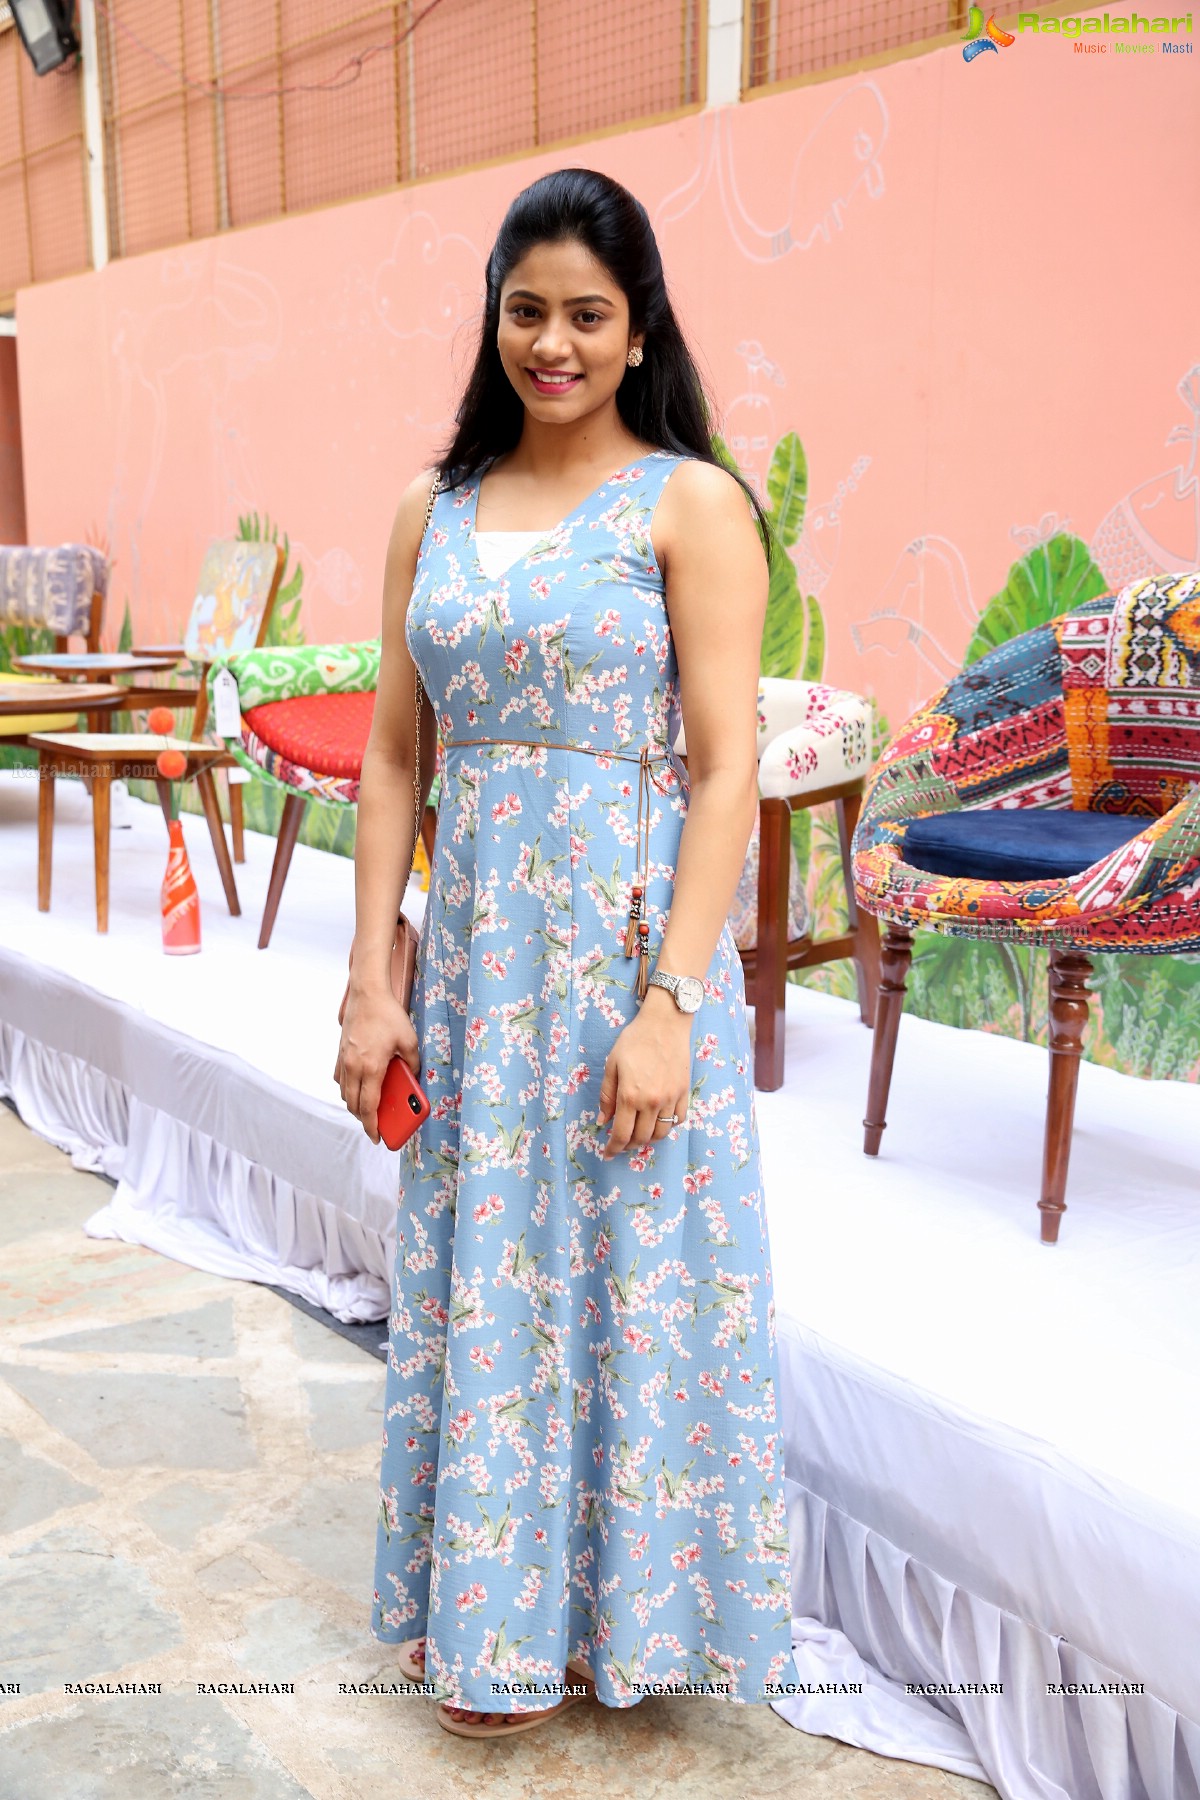 Tangerine Turfs Unveils Enchanting ‘Celebration of India’ Collection at Good Cow Café, Jubilee Hills